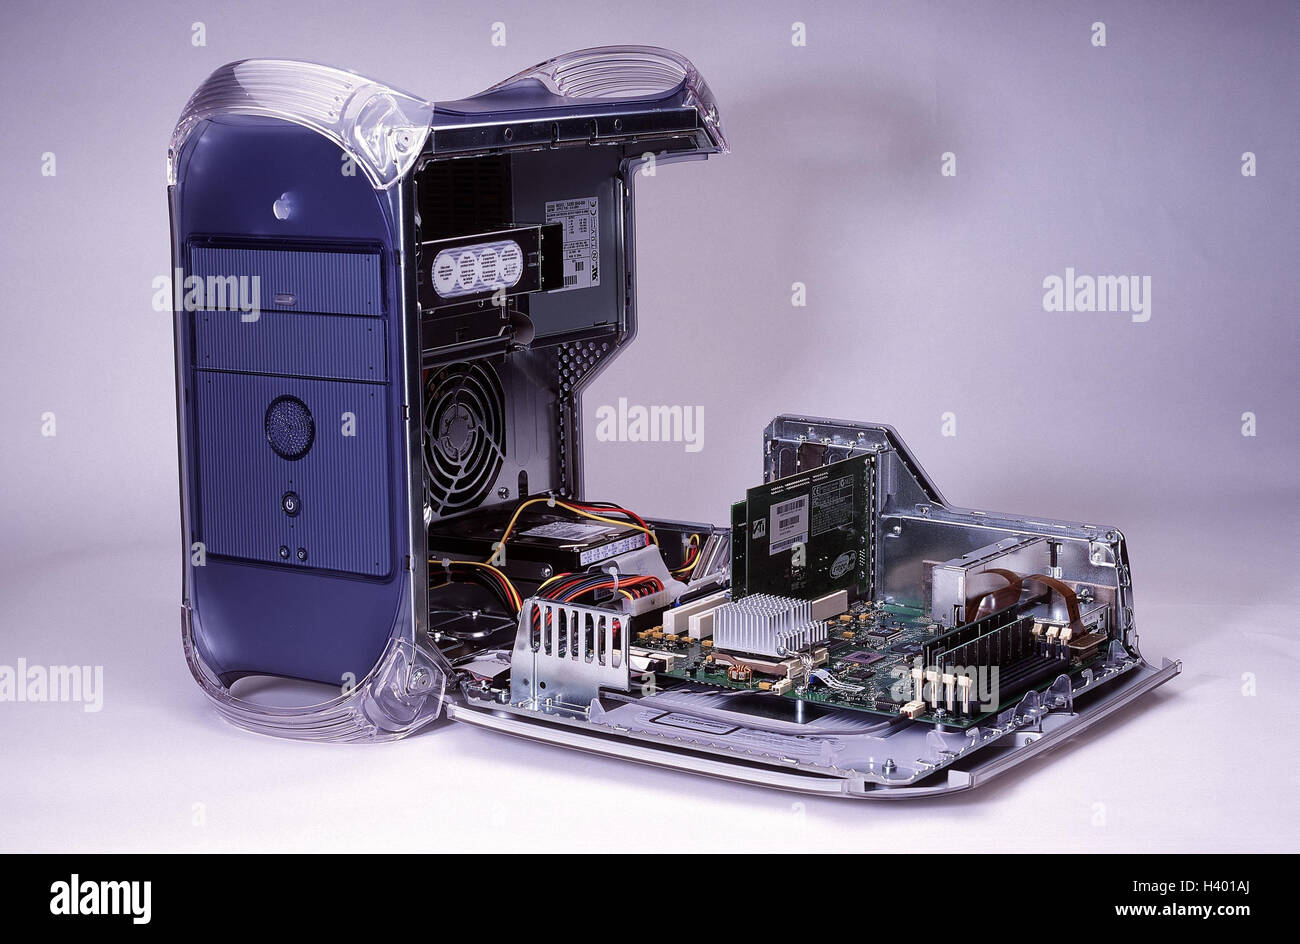 Computer Apple G4, computer, opened, Motherboard, cards, main memories, hard disk, processor, interface card circuit boards, prefabricated parts, EDP, technology, technology, inner life, computer technology, Macintosh, studio, product photography, Still l Stock Photo